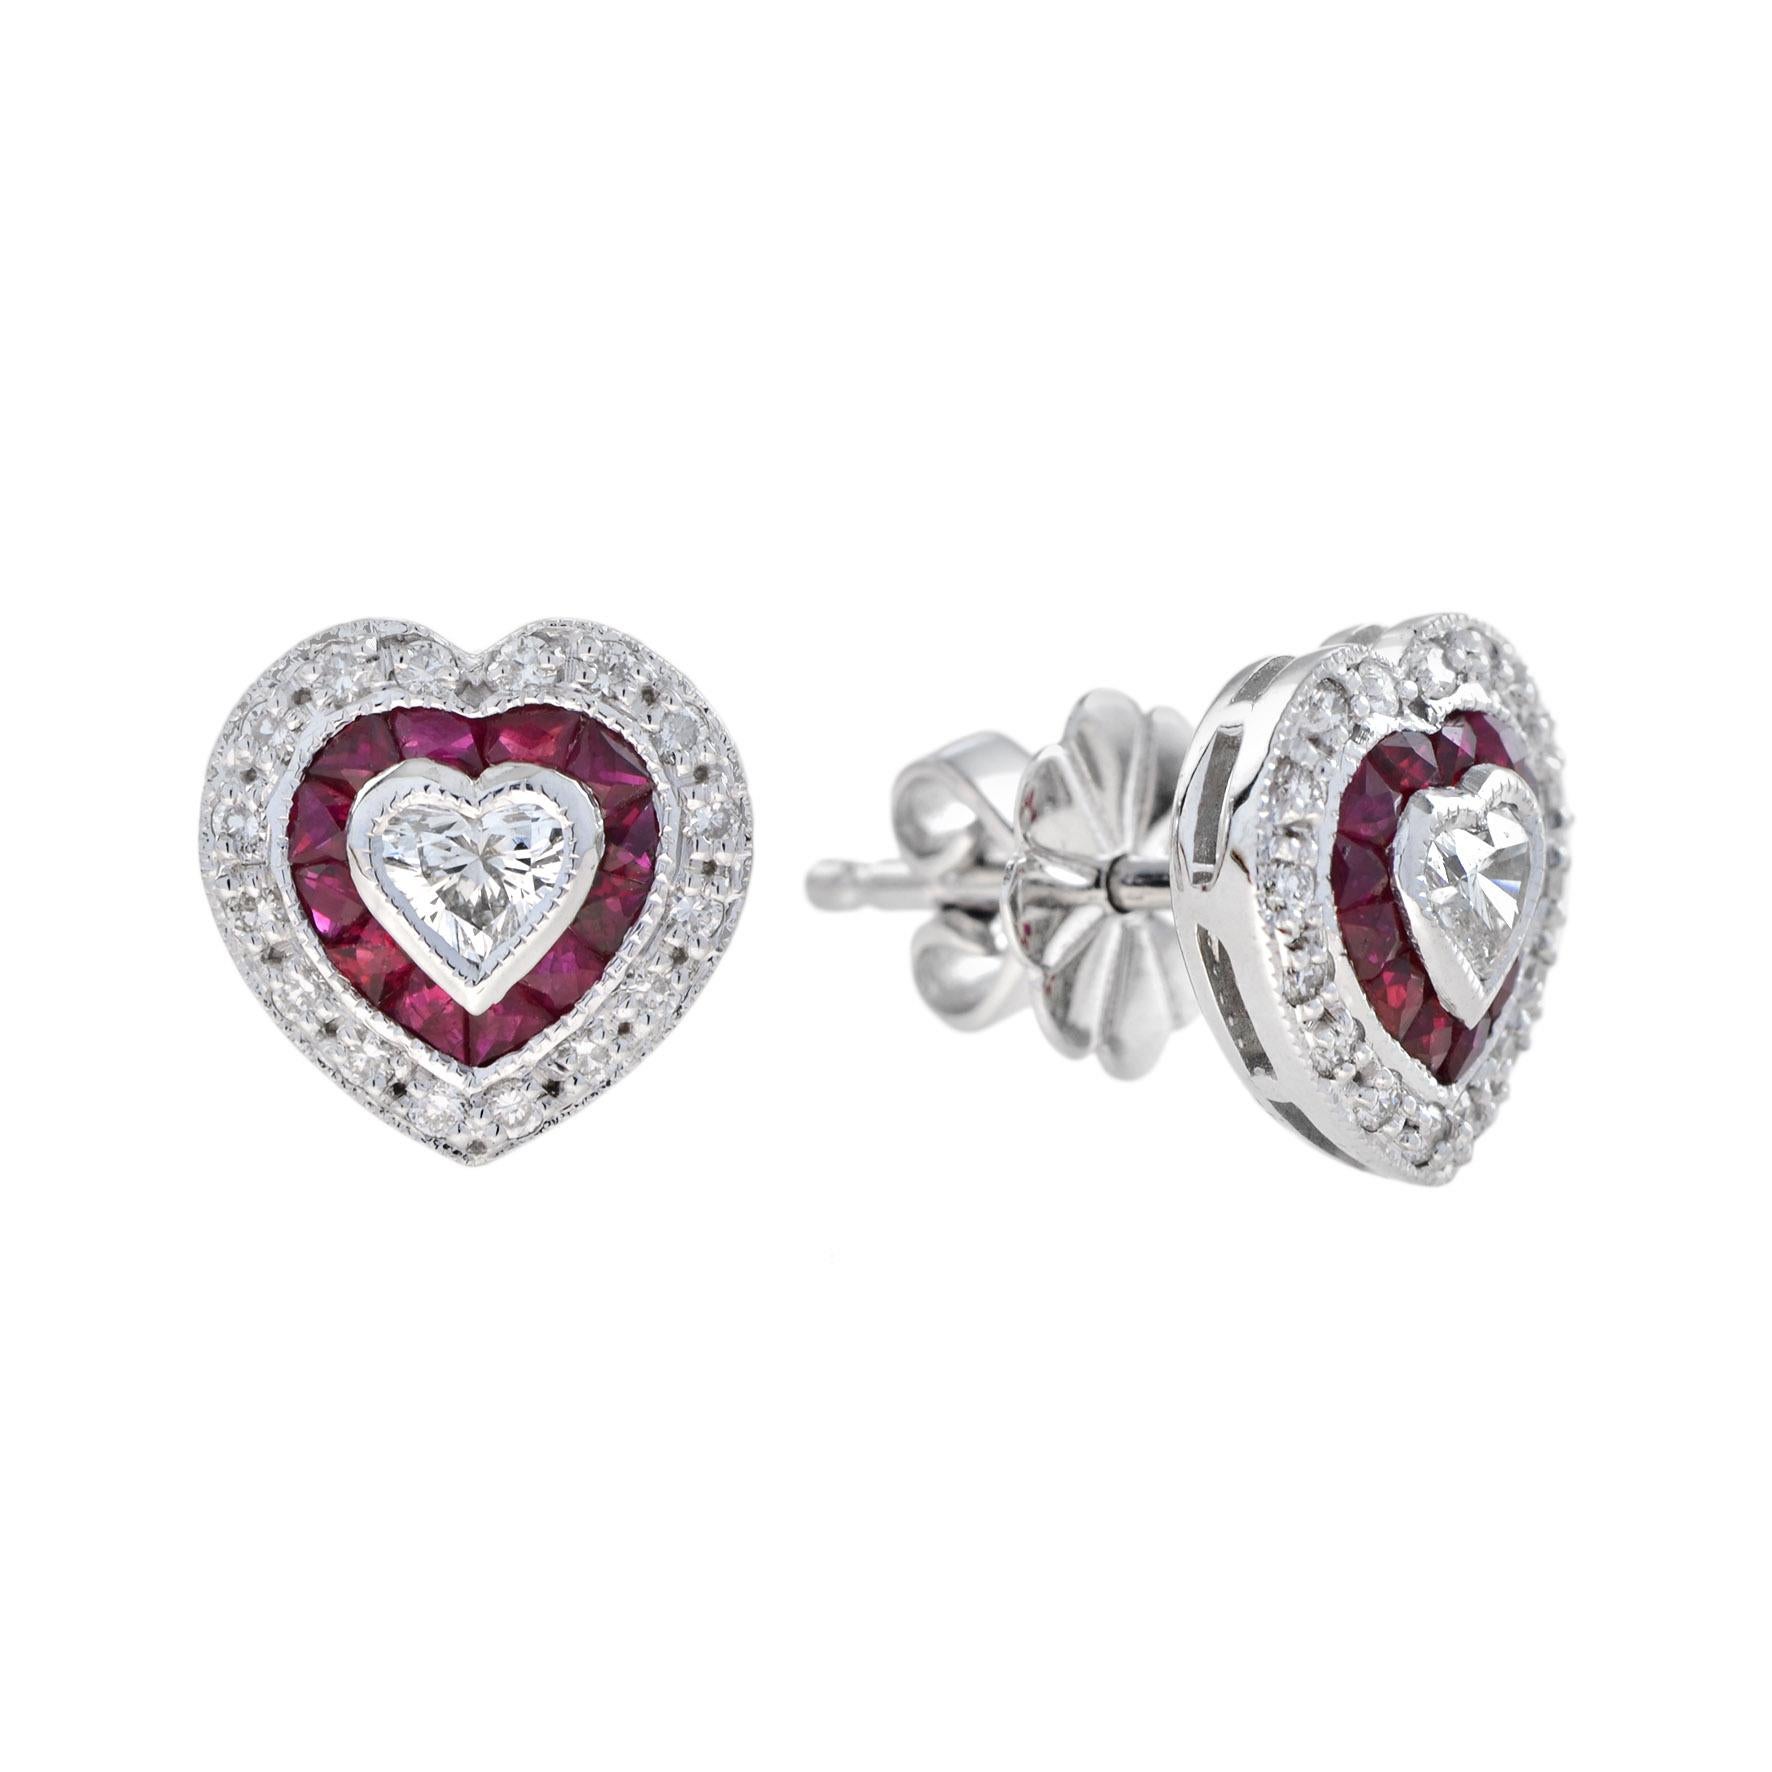 Crafted in 14k white gold, these lovely heart shaped stud earrings and pendant jewelry set  offer a beautiful combination of sophistication and charm. The center heart shaped diamonds grade G color, VS clarity. A frame of French cut rubies, and